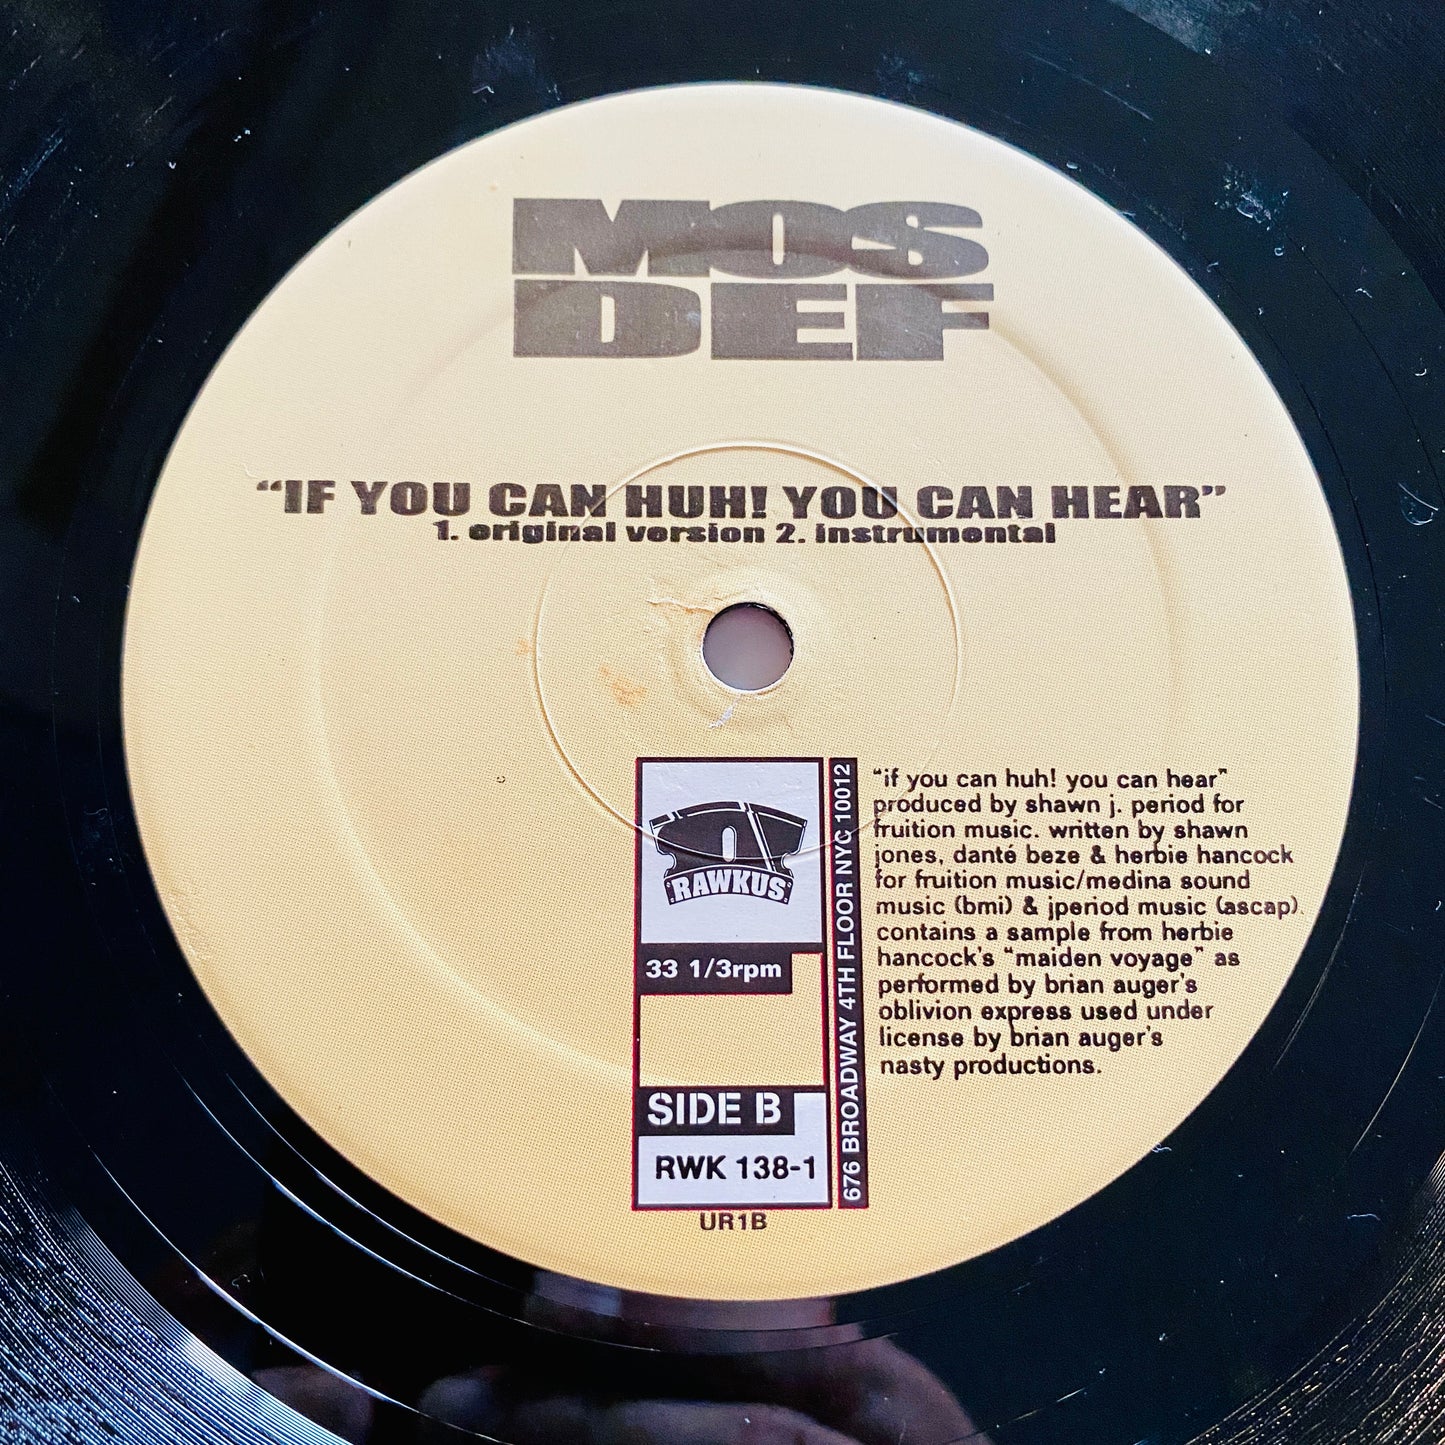 Mos Def - The Universal Magnetic / If You Can Huh You Can Hear (12", RP). 12" HIP-HOP